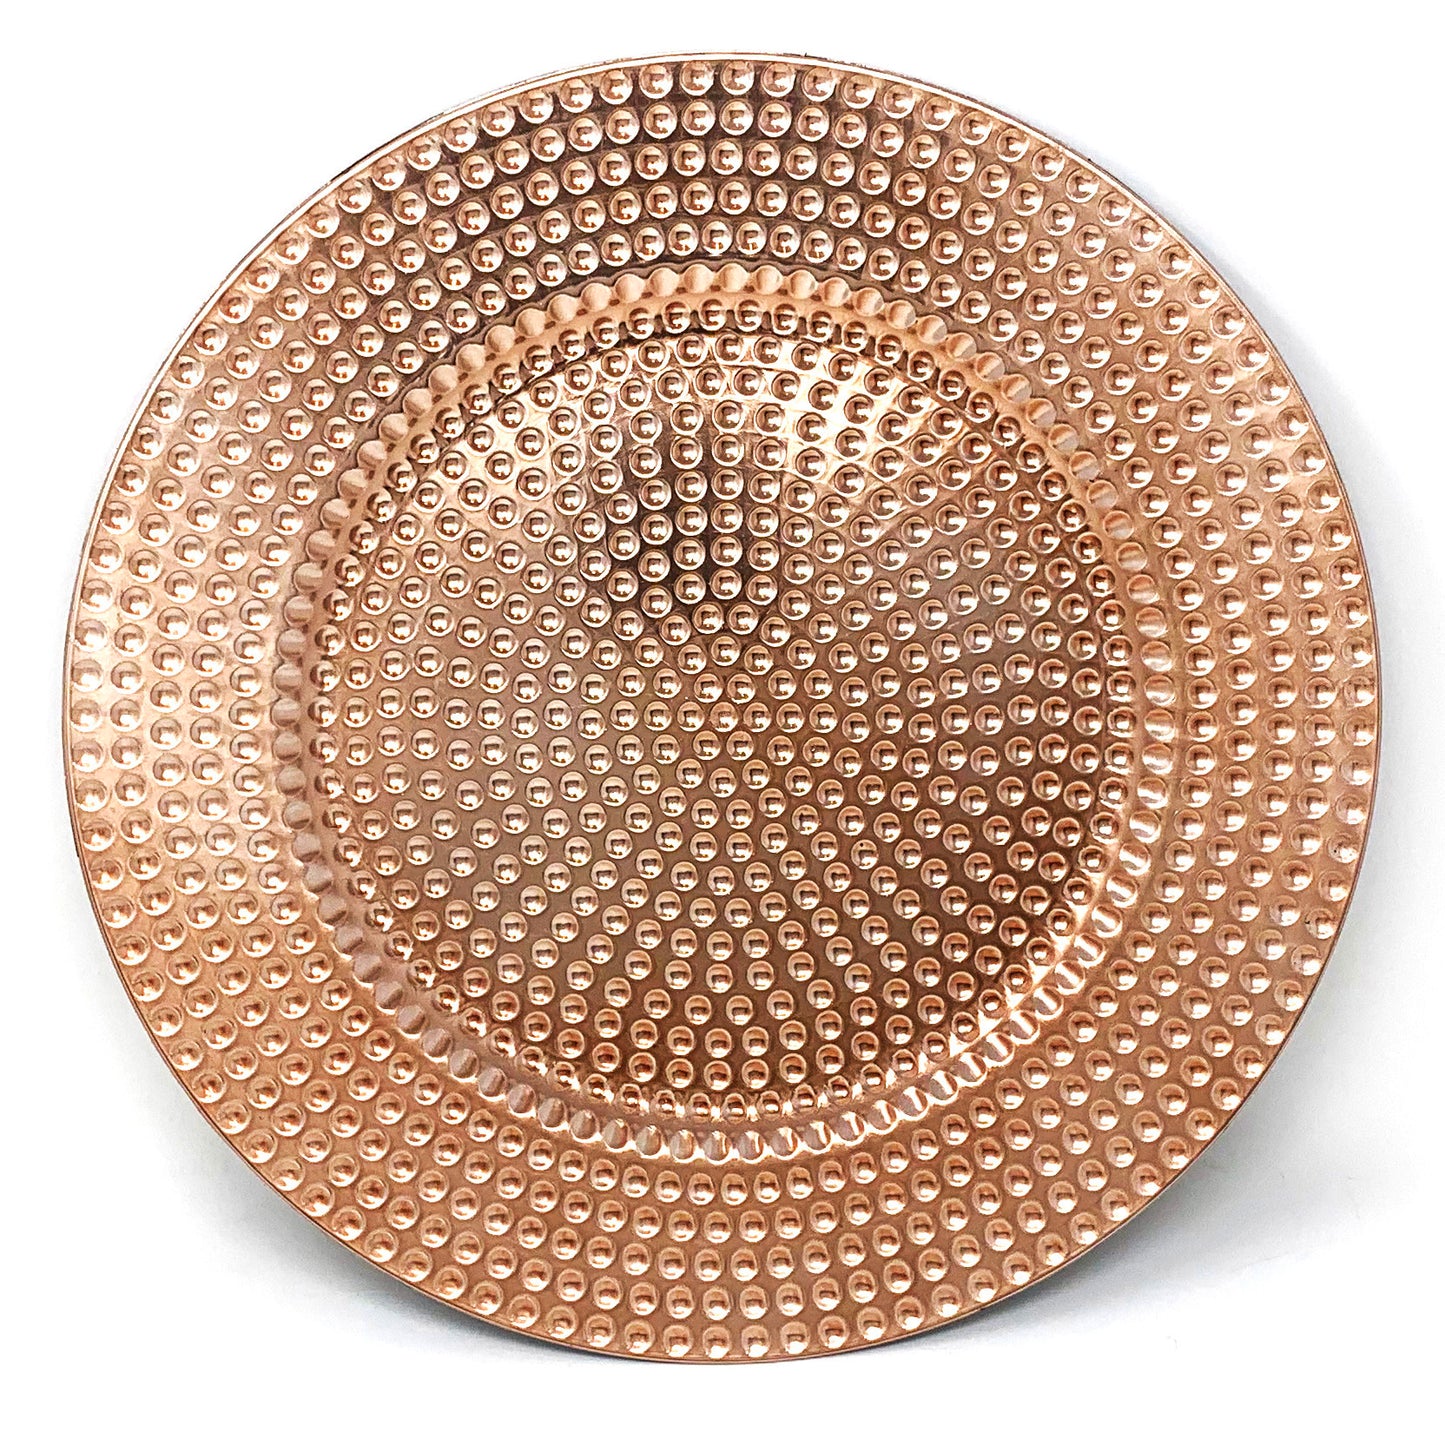 Allgala Charger Plates 13-Inch 6-Pack Plastic Hammered Round Charger Plates